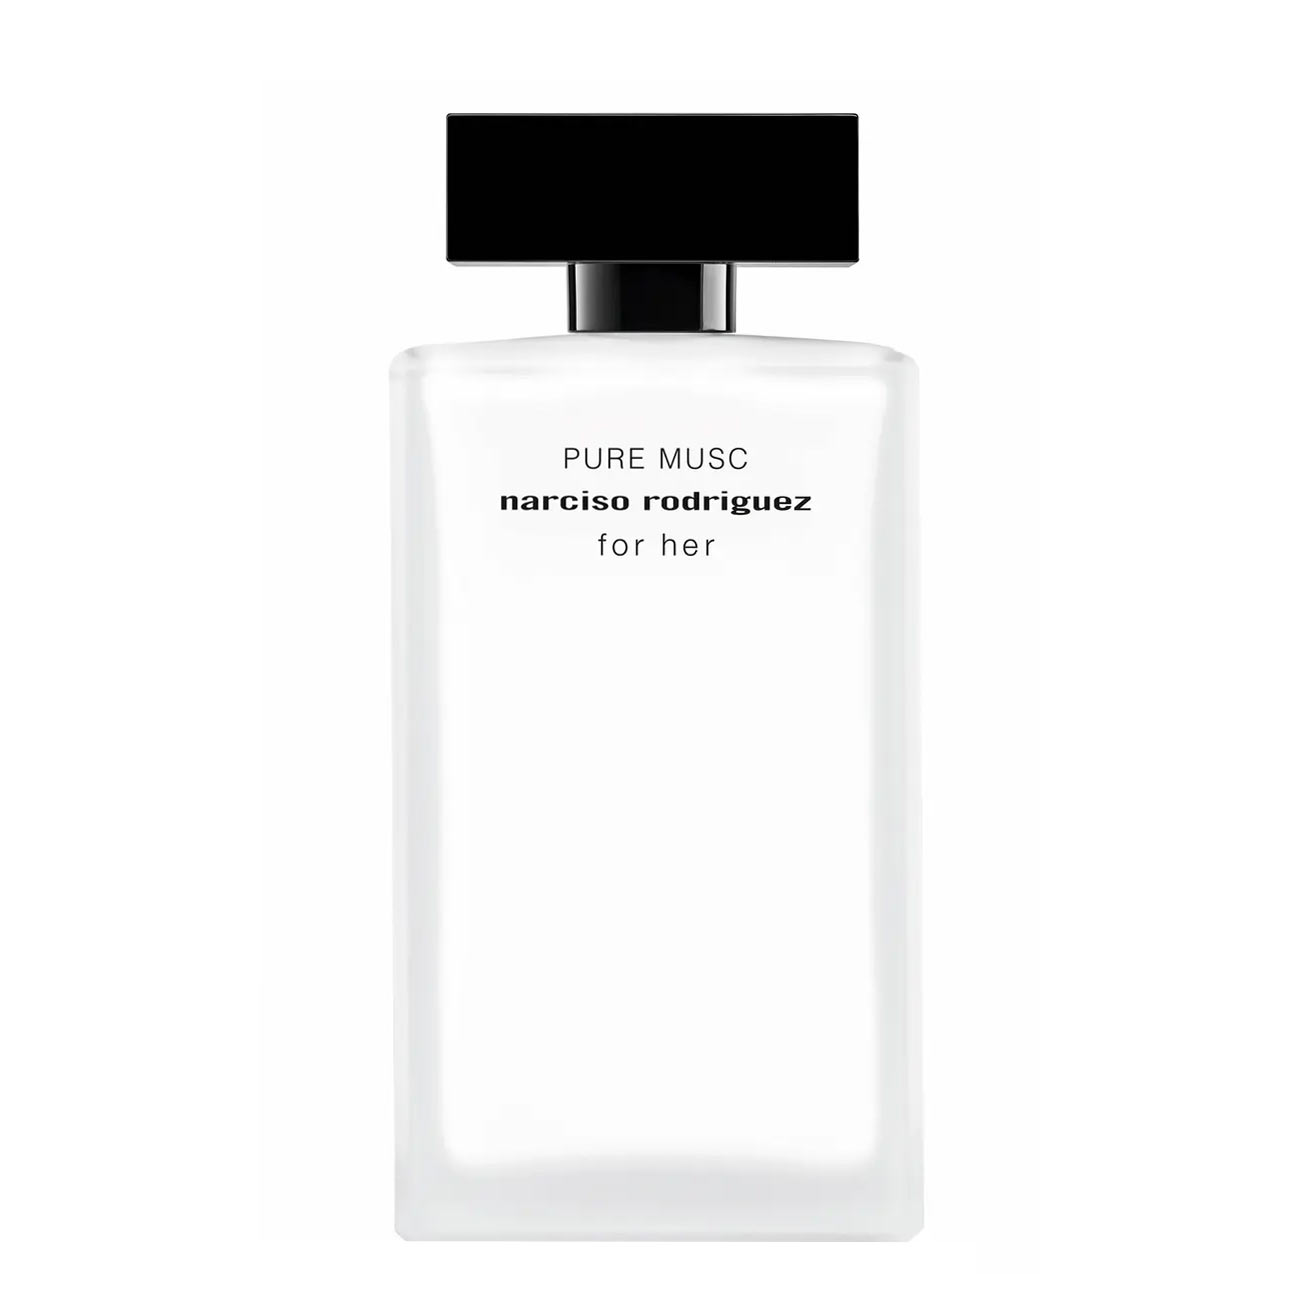 Pure Musc For Her Narciso Rodriguez Image